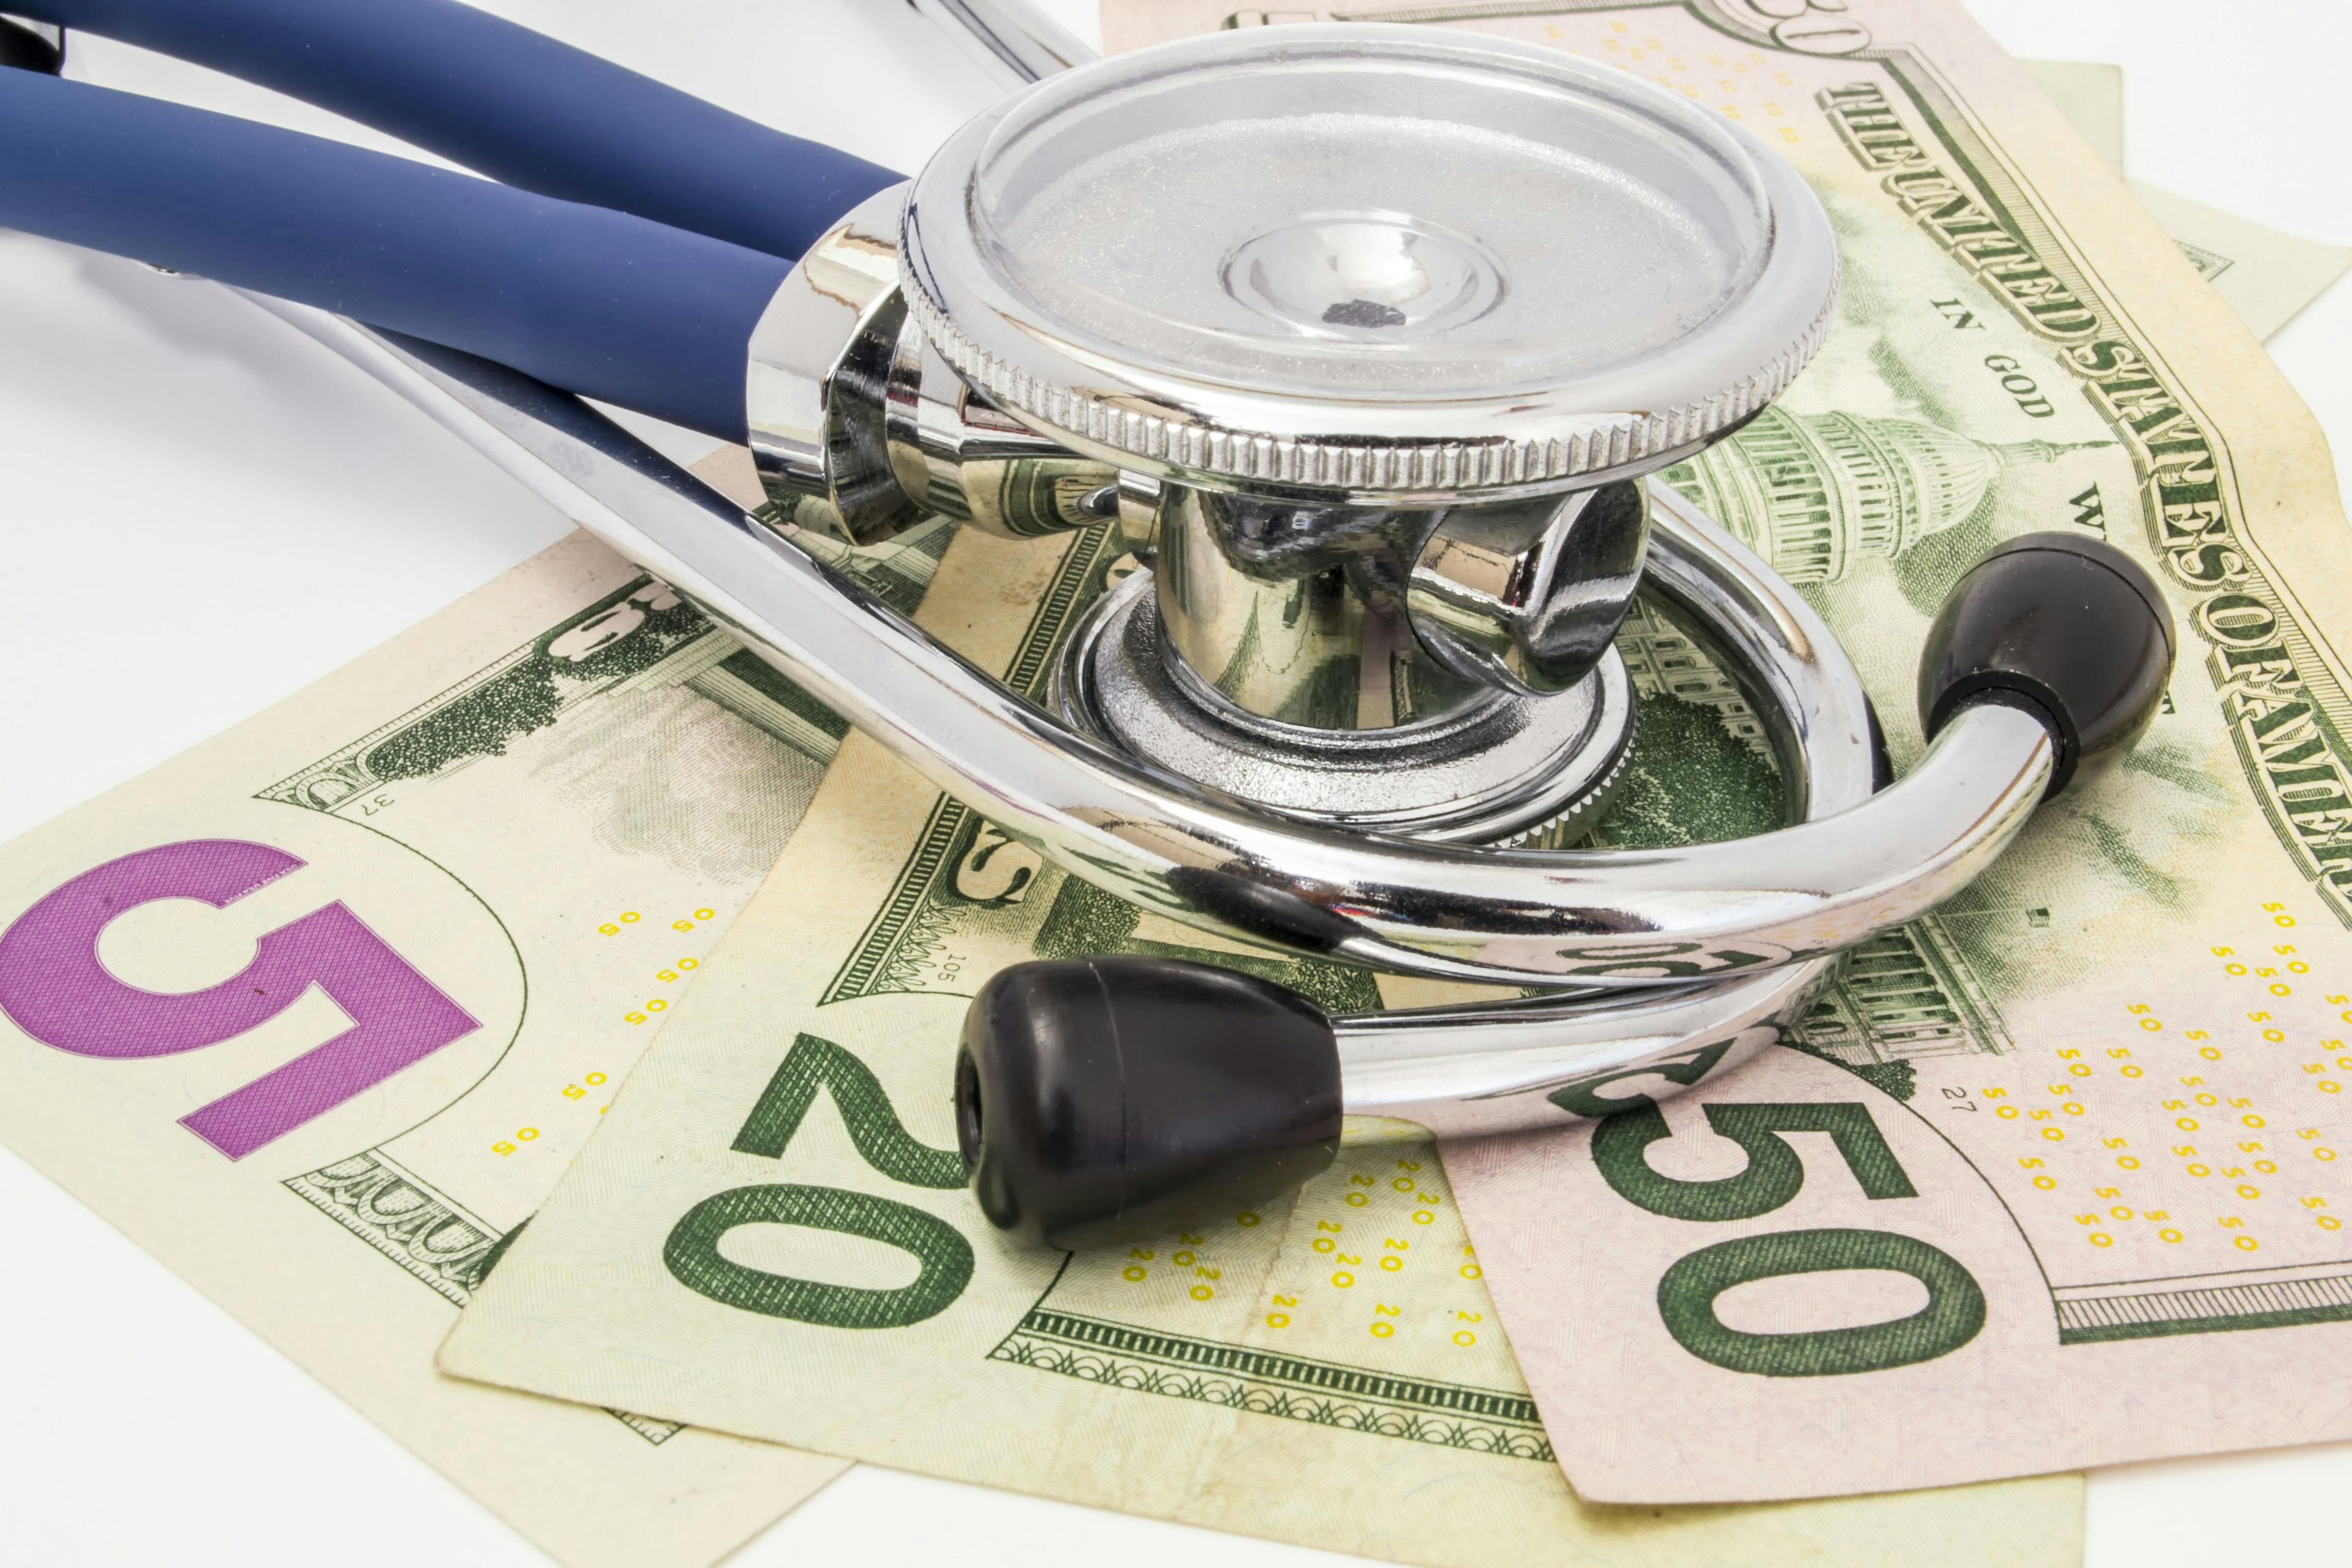 Primary care physicians in demand, but salaries lag behind those of specialists